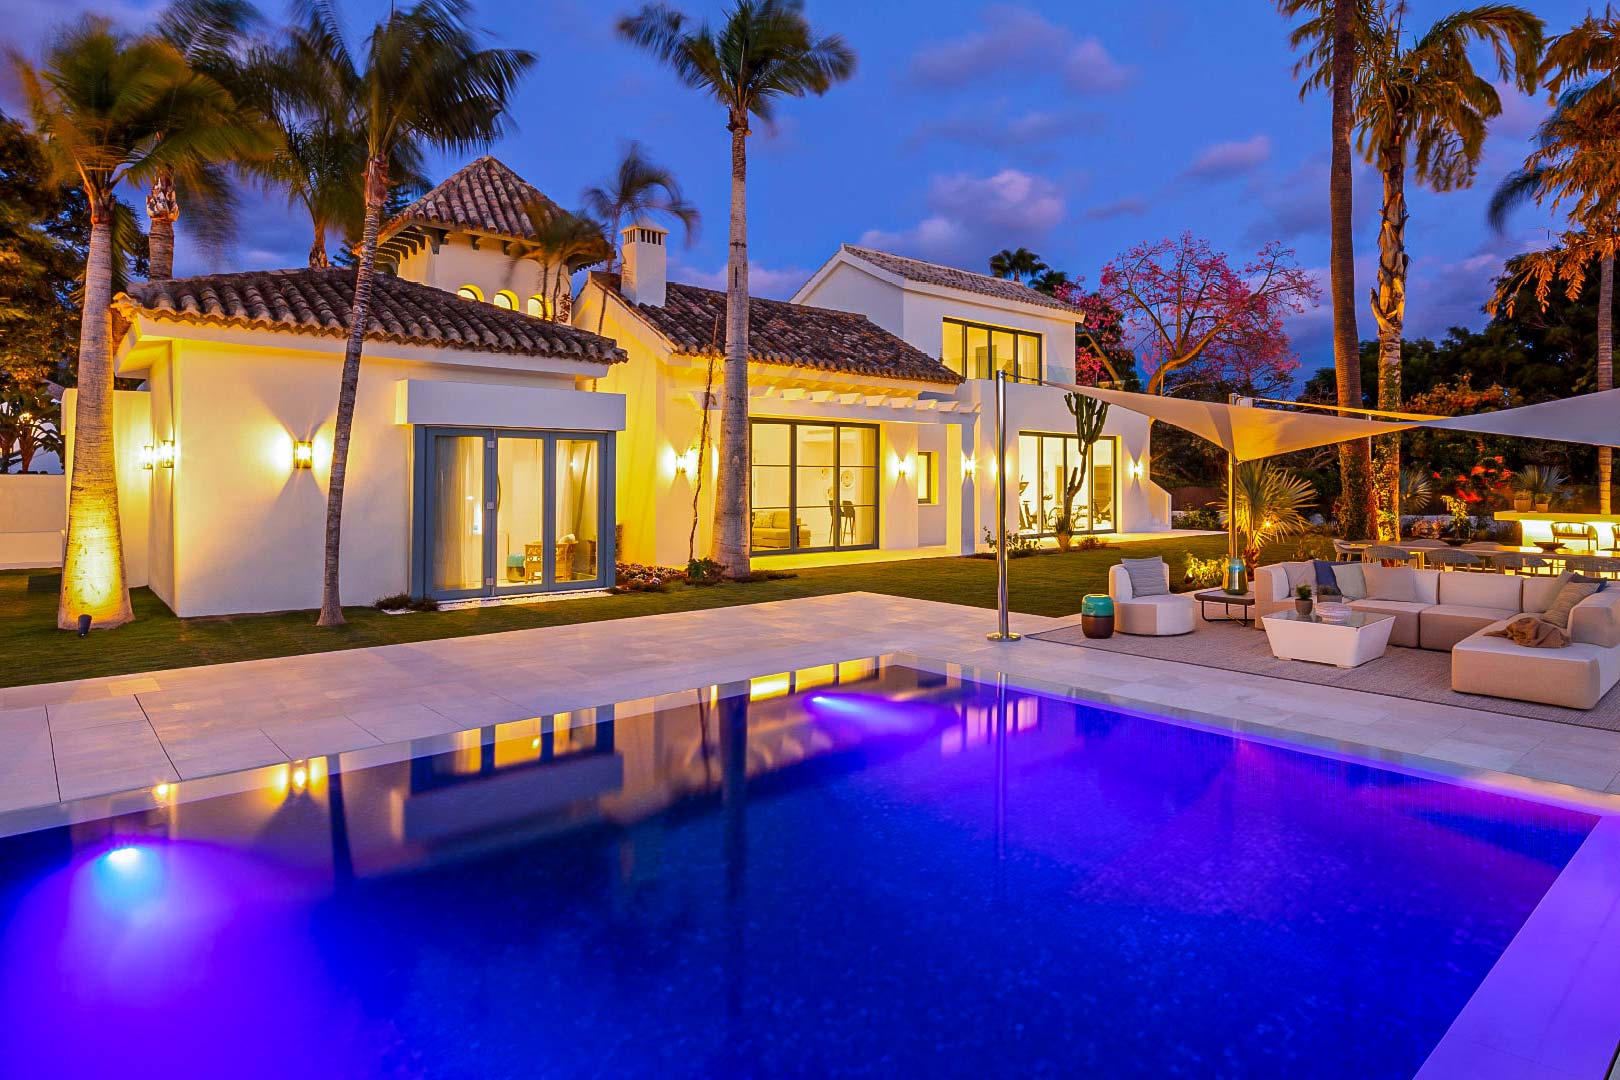 The Top 5 Luxury Villas in Nueva Andalucia for rent this summer